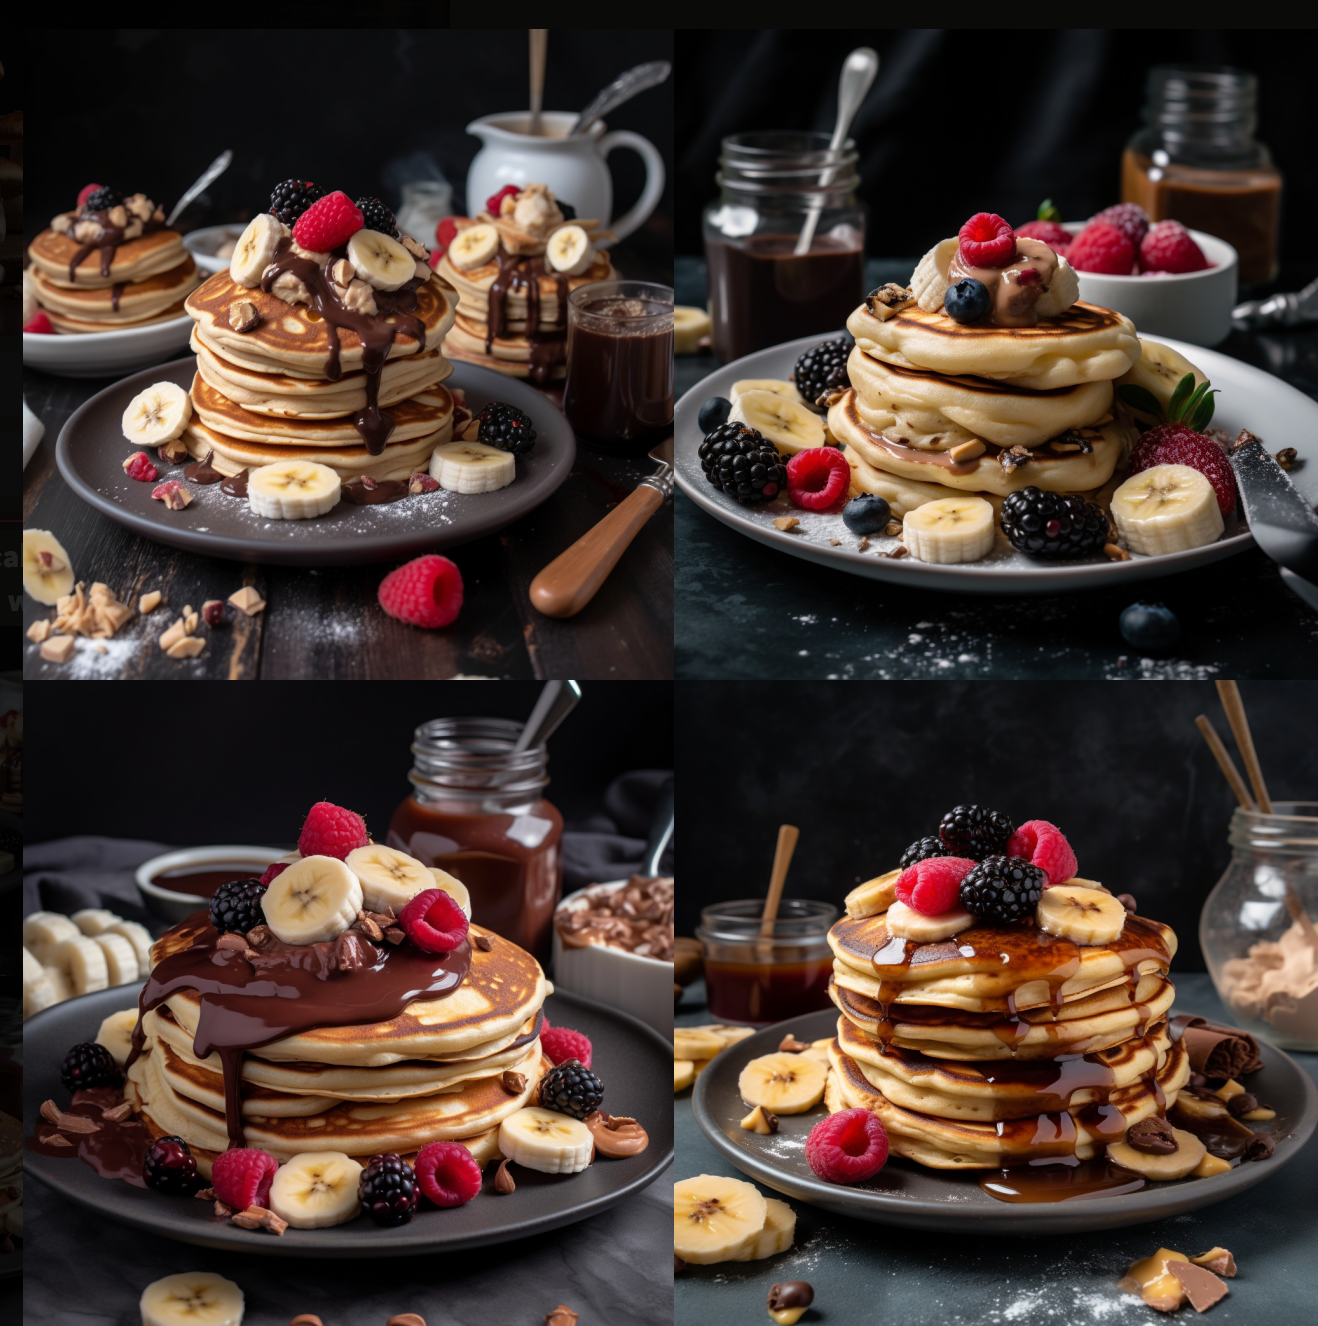 fluffy pancakes from a classic American breakfast. With an ice cream scoop, with peanut butter, banana slices and chocolate drops. And maple syrup, Nutella, jam and refined the dough with berries